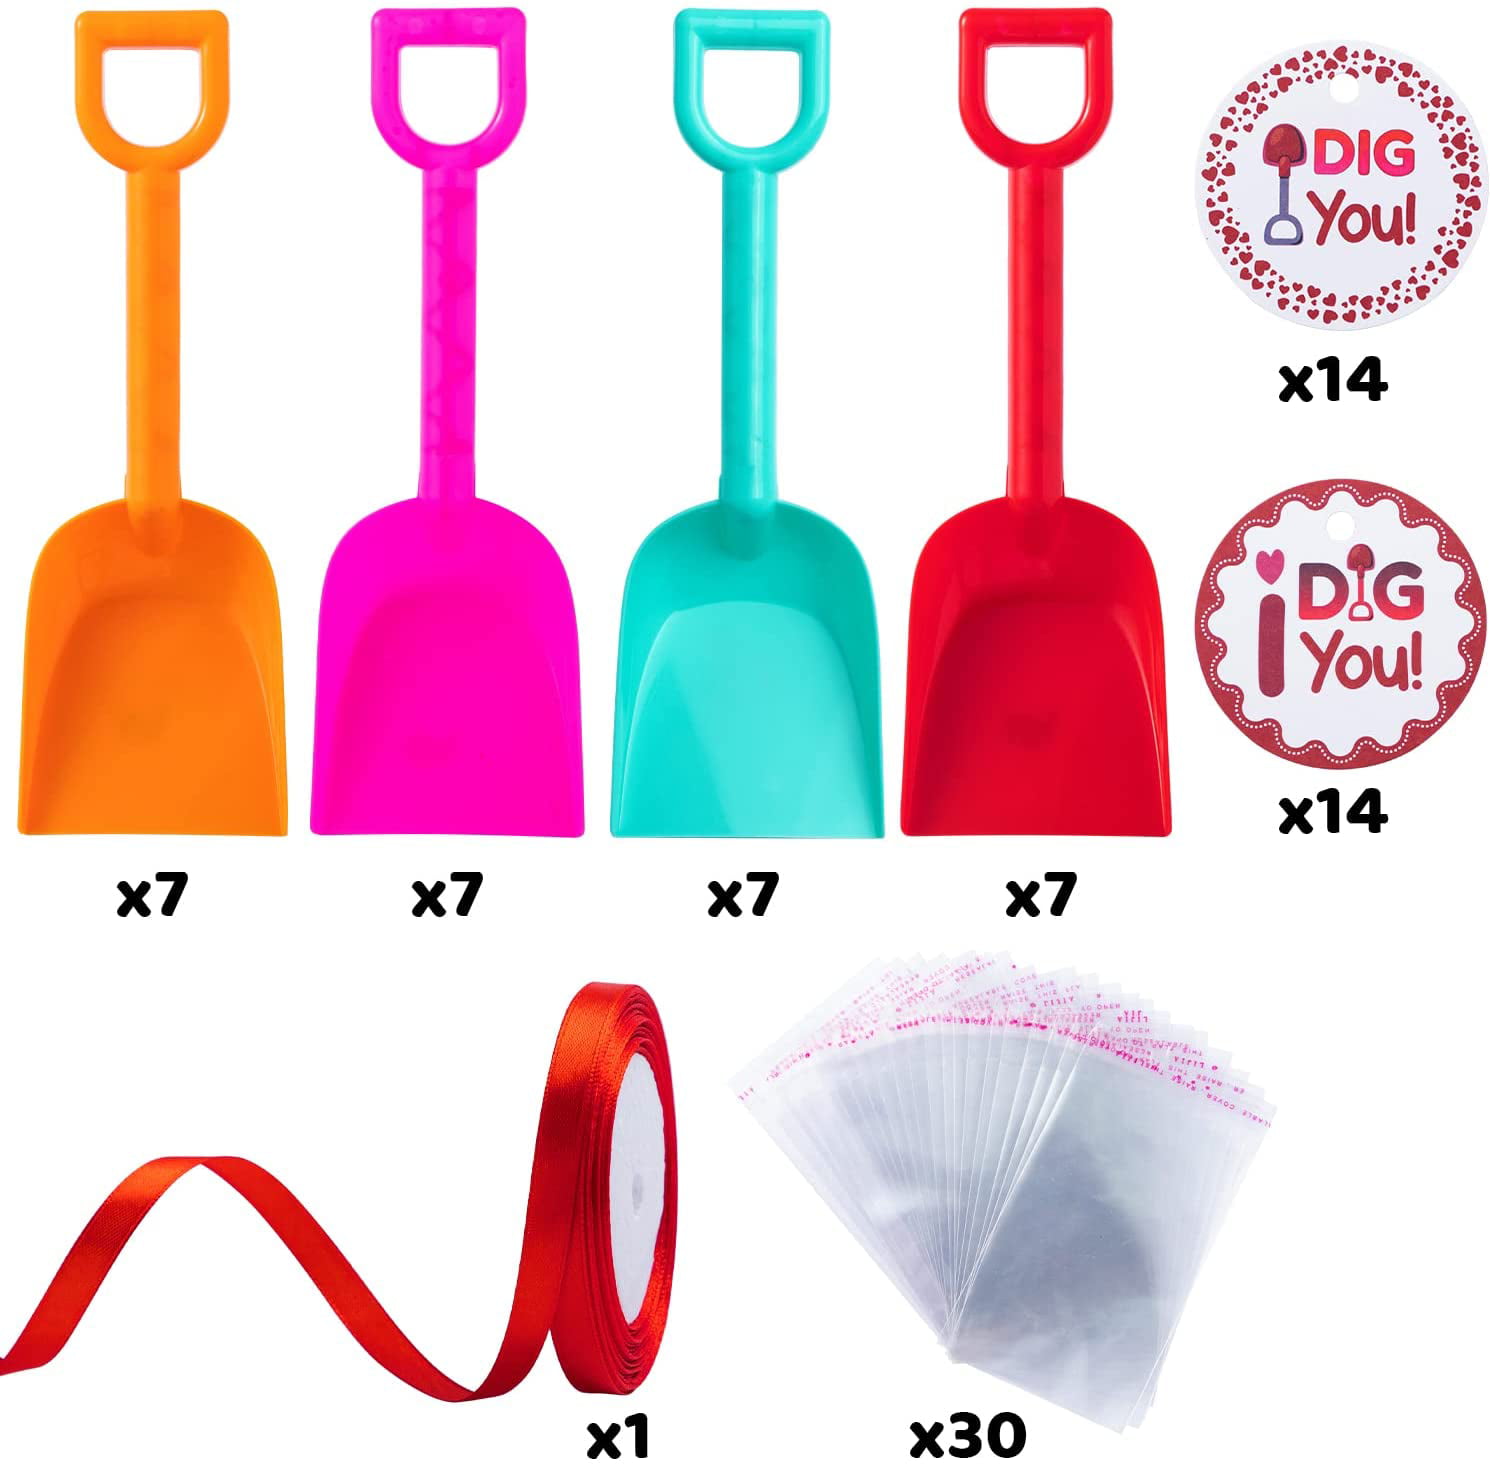 10 Mix Colors of Toy Shovels and 10 "I Dig You" Stickers Made in America No BPA 